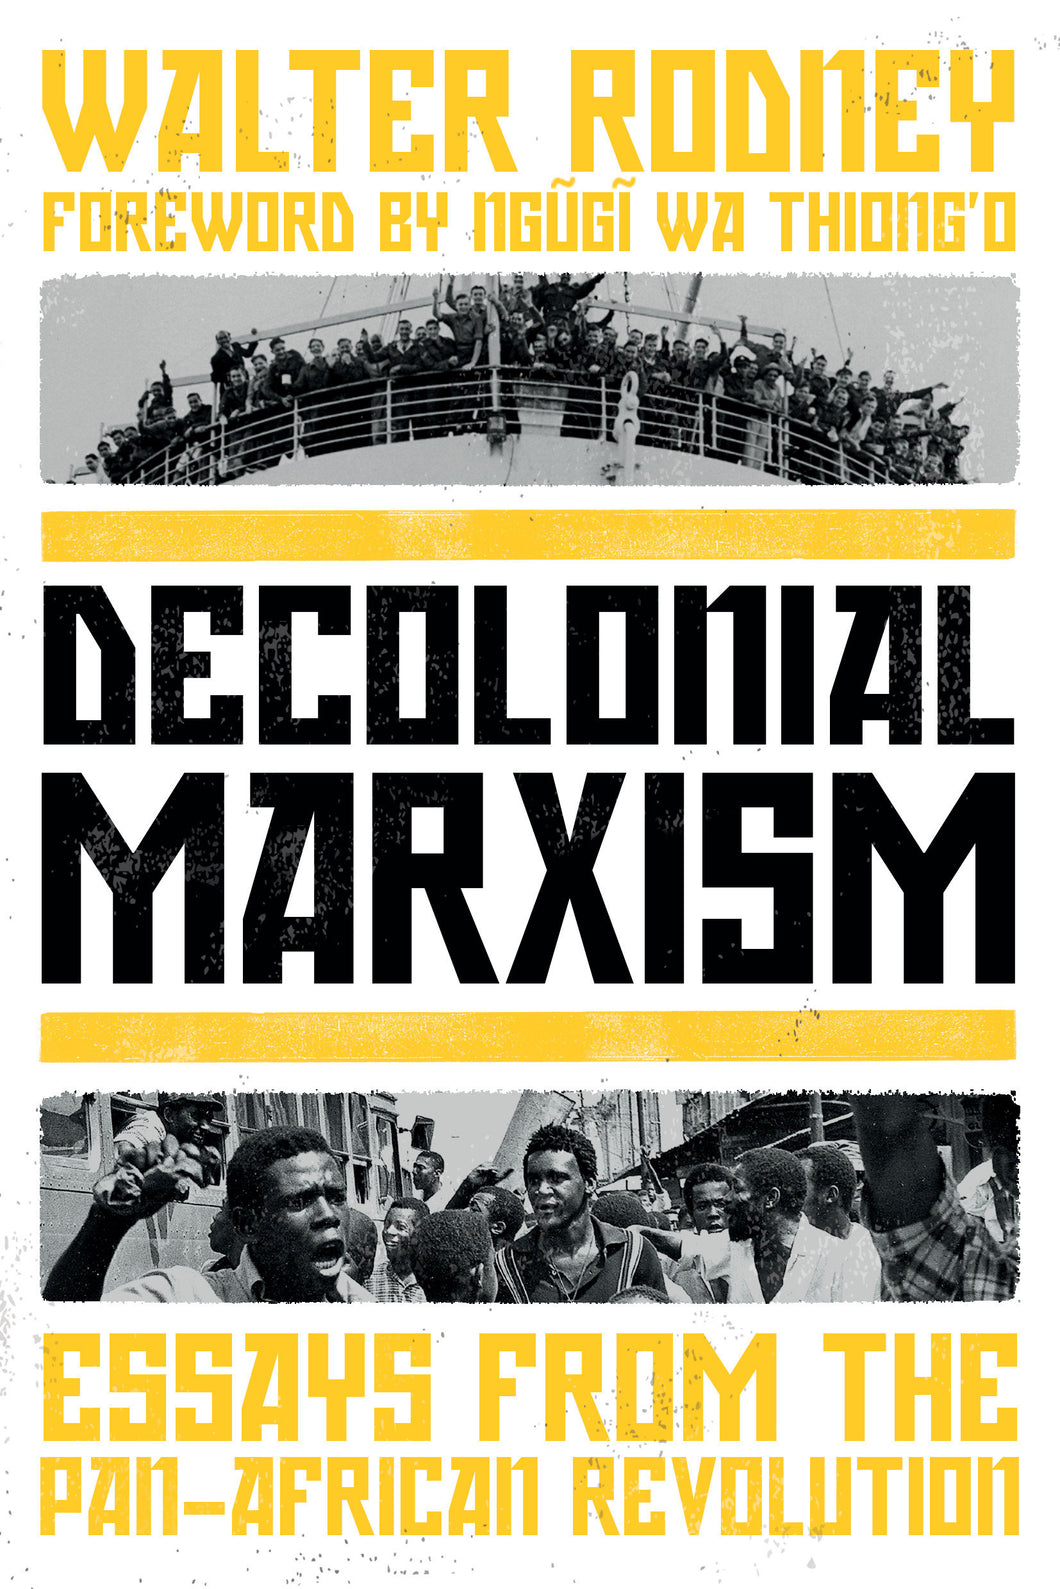 Decolonial Marxism : Essays from the Pan-African Revolution